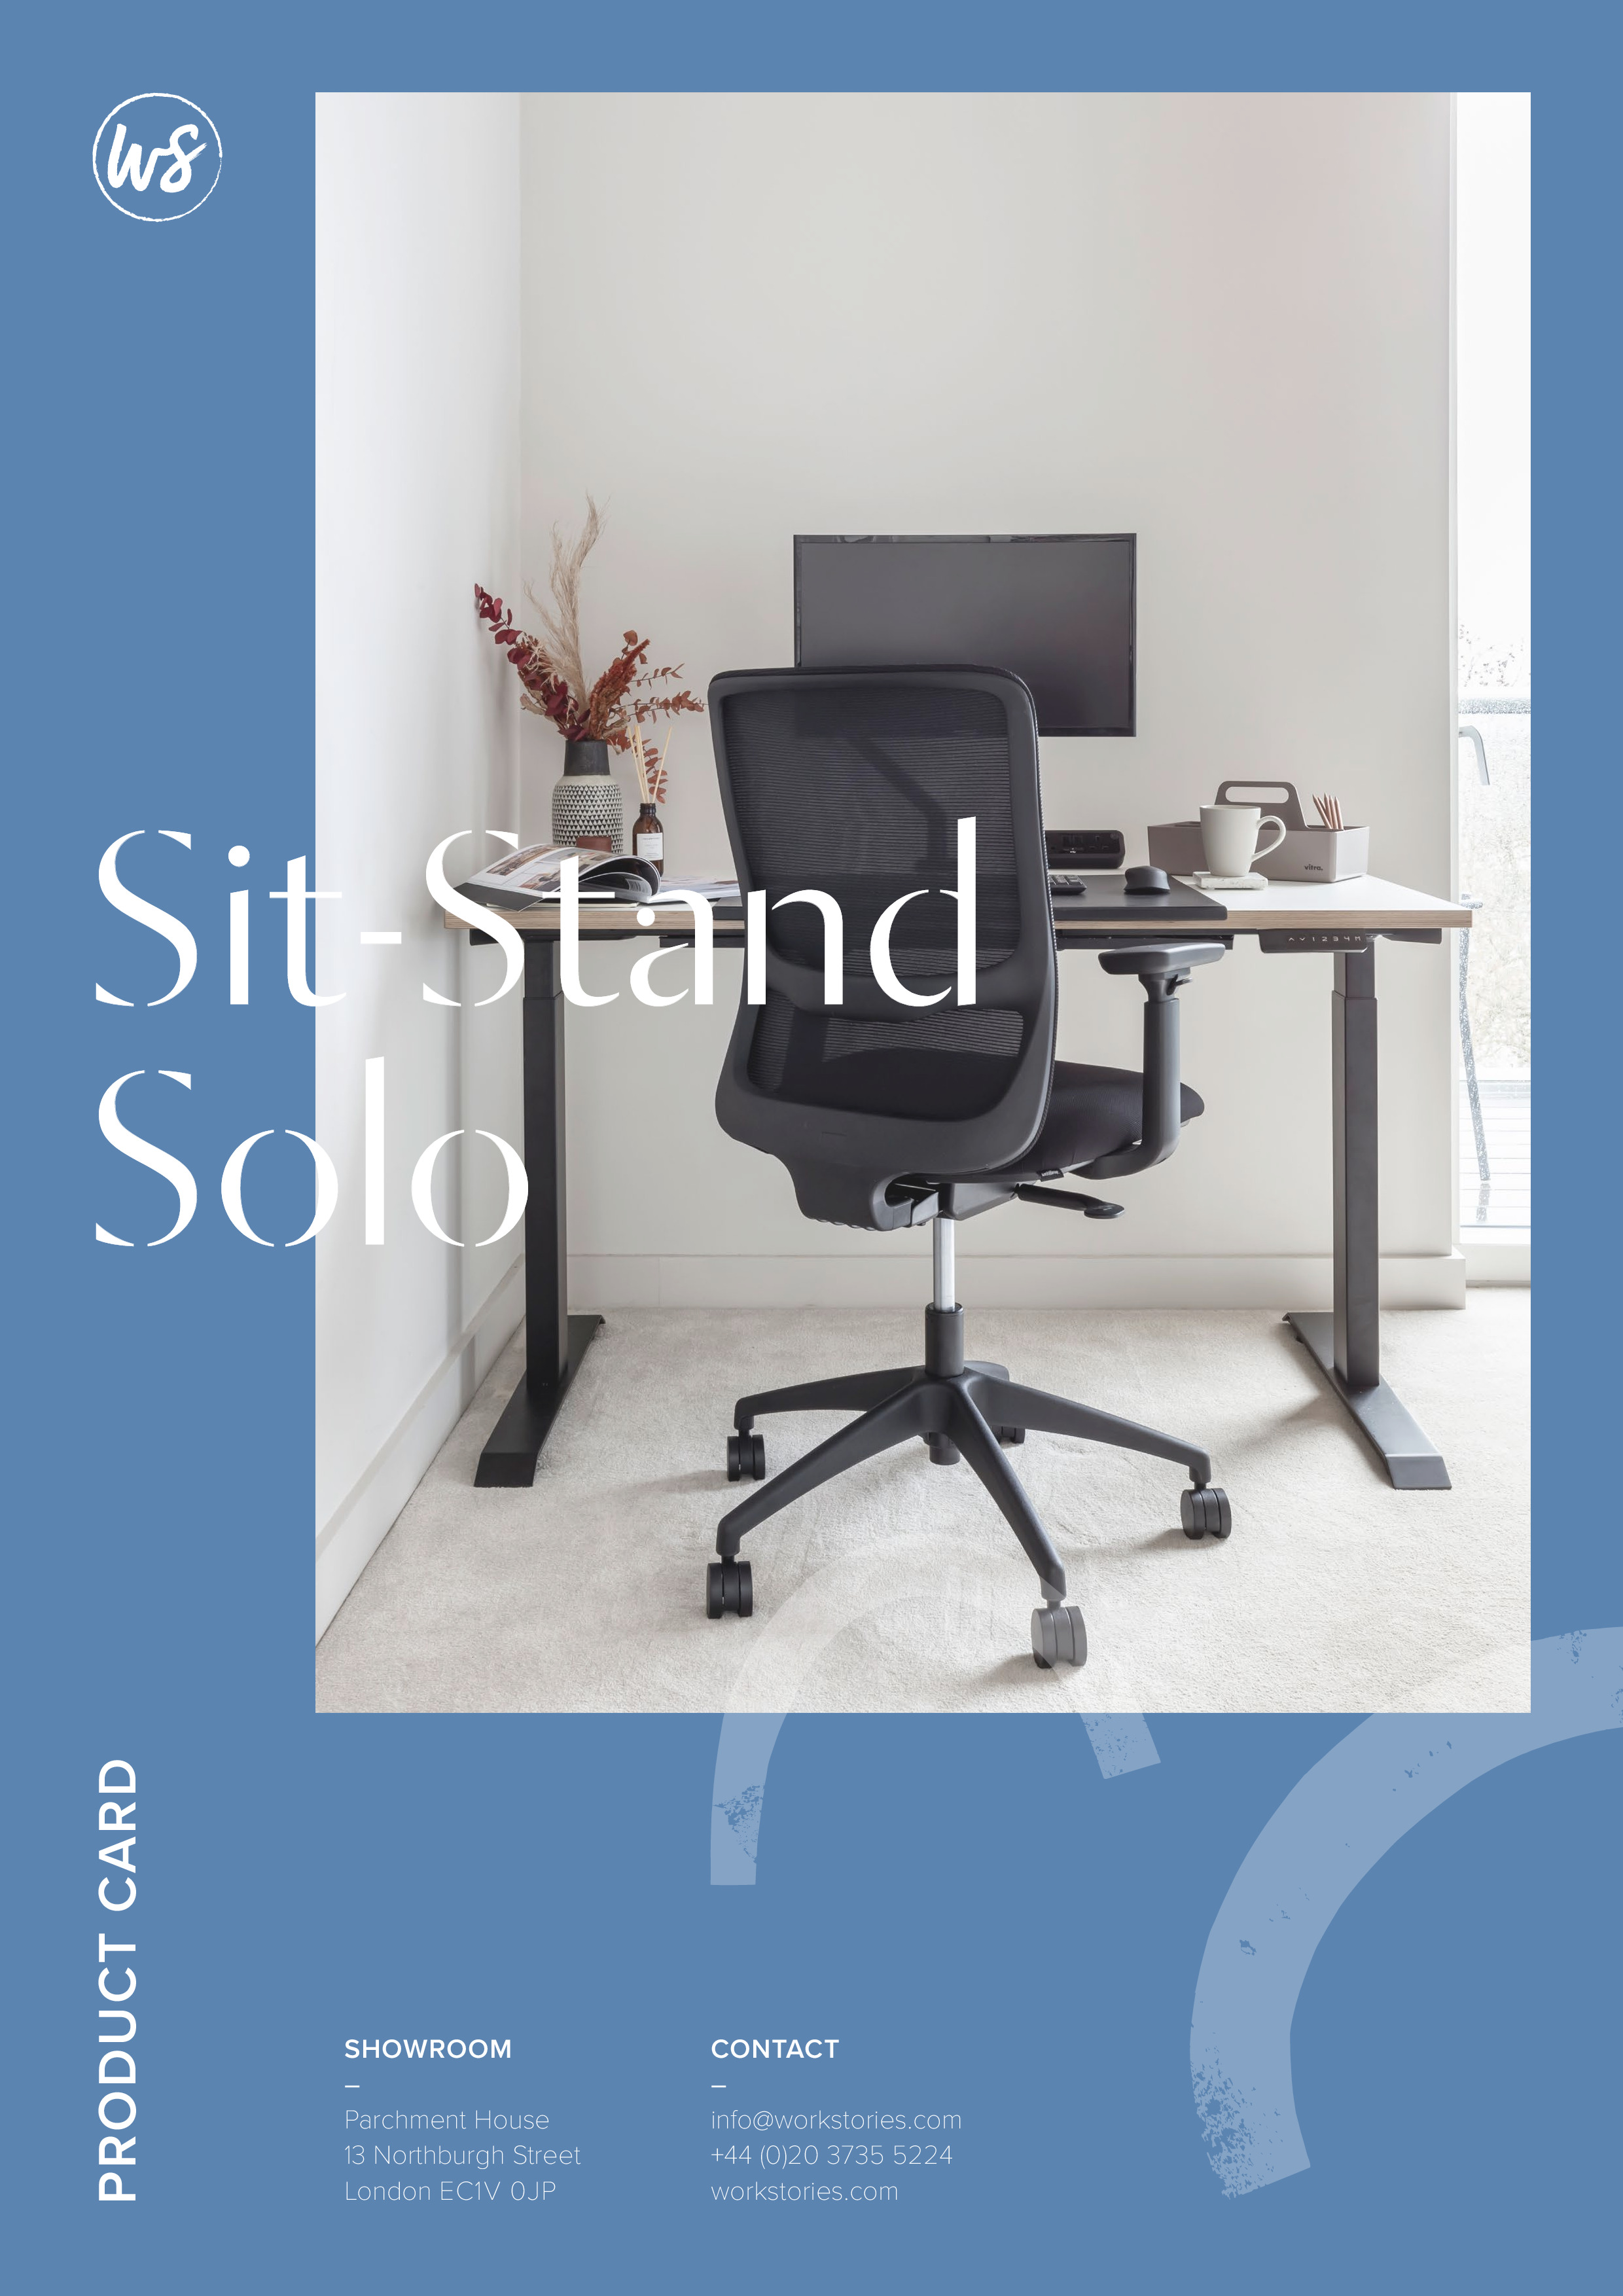 WS - Sit-Stand Solo - Product Card